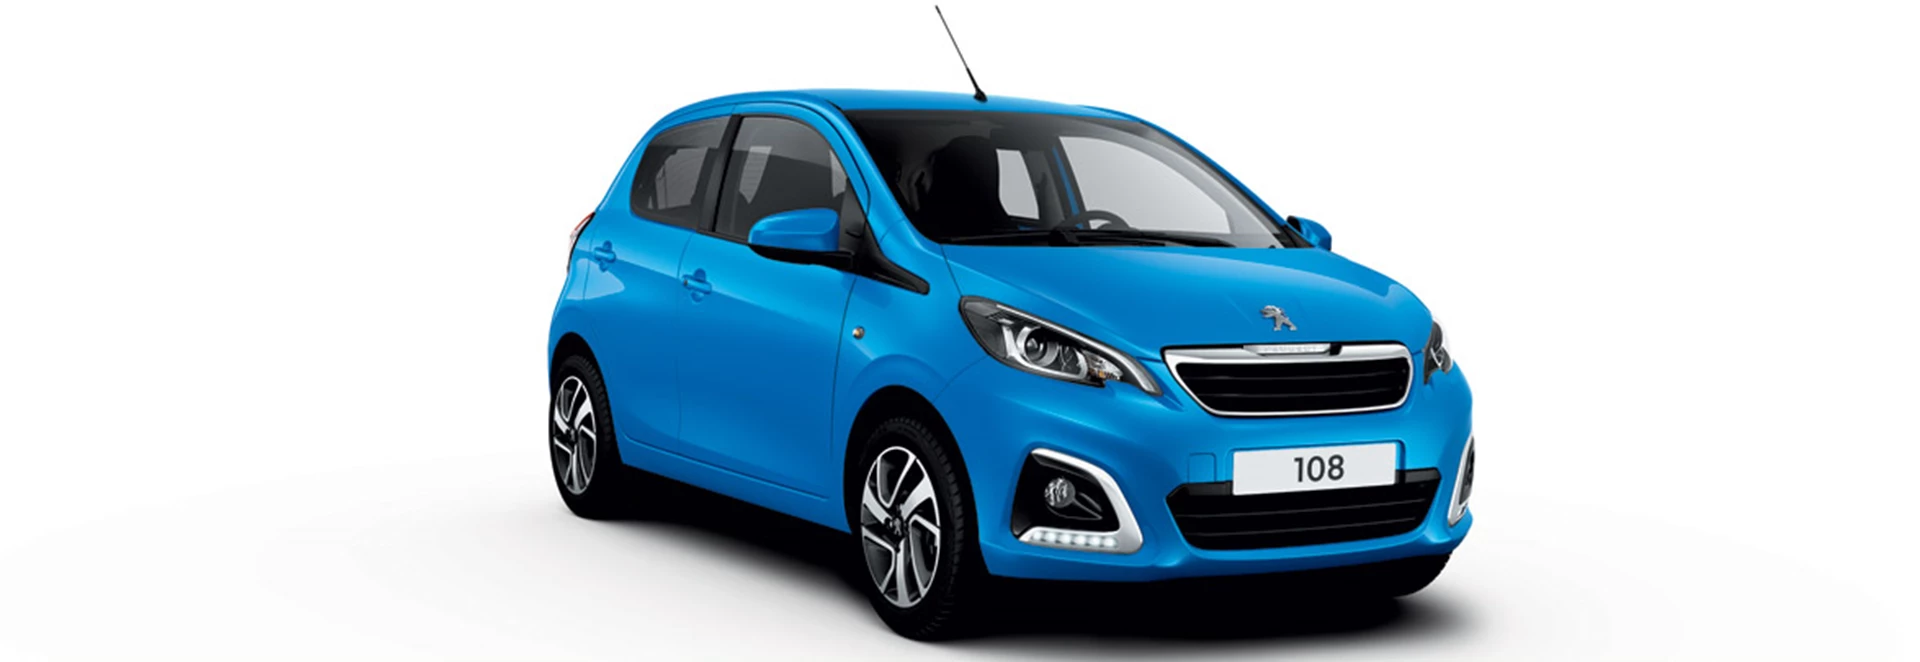 Peugeot 108 gets new engines and equipment 